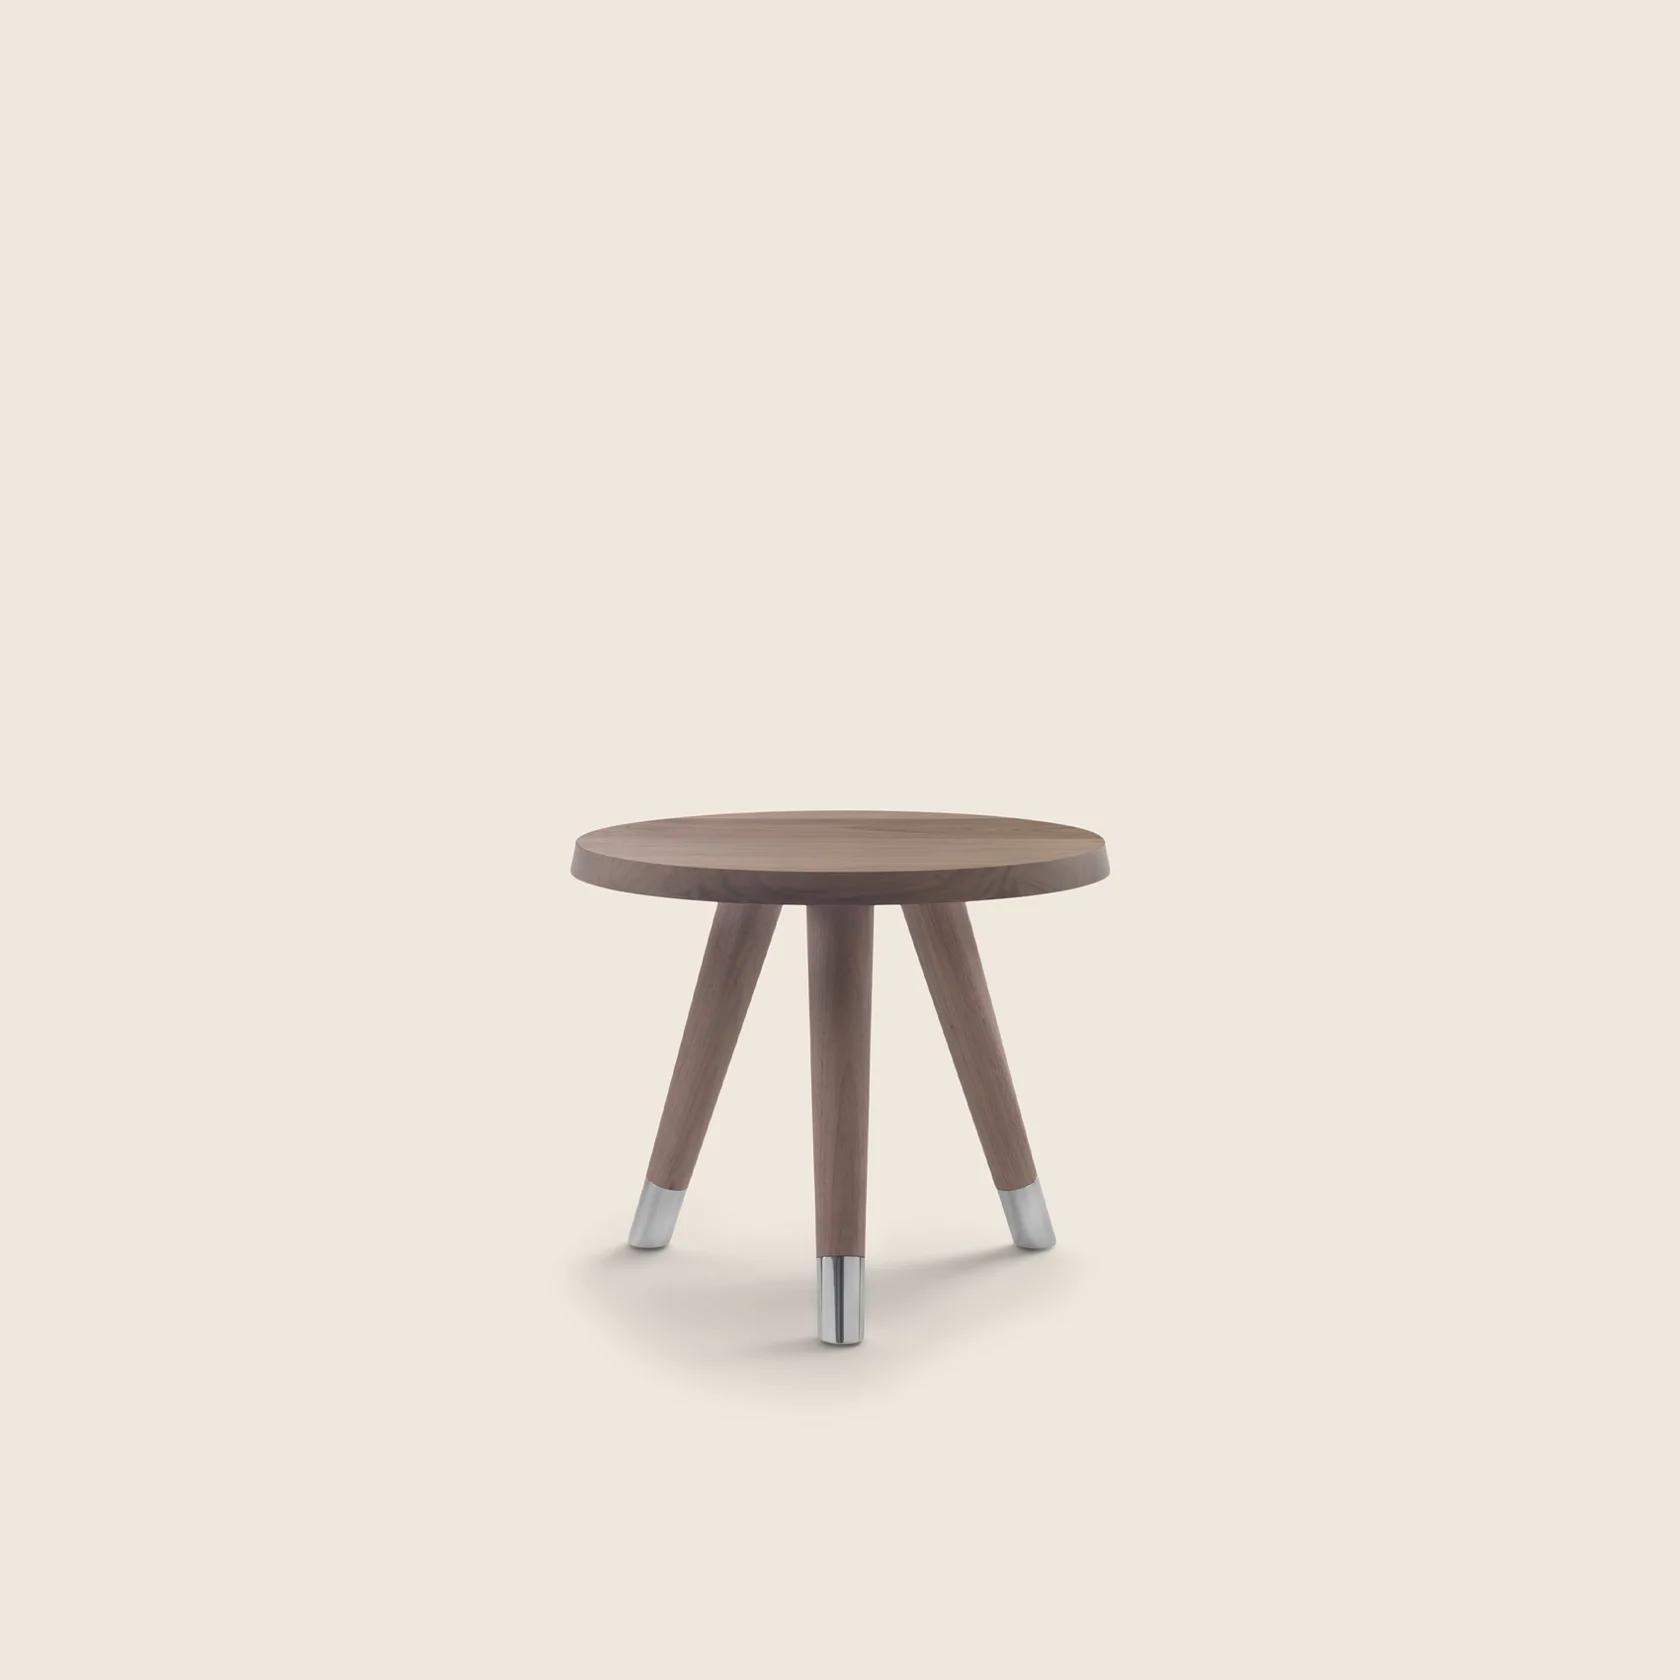 02C660_ADLER_SMALL_TABLE_01.png